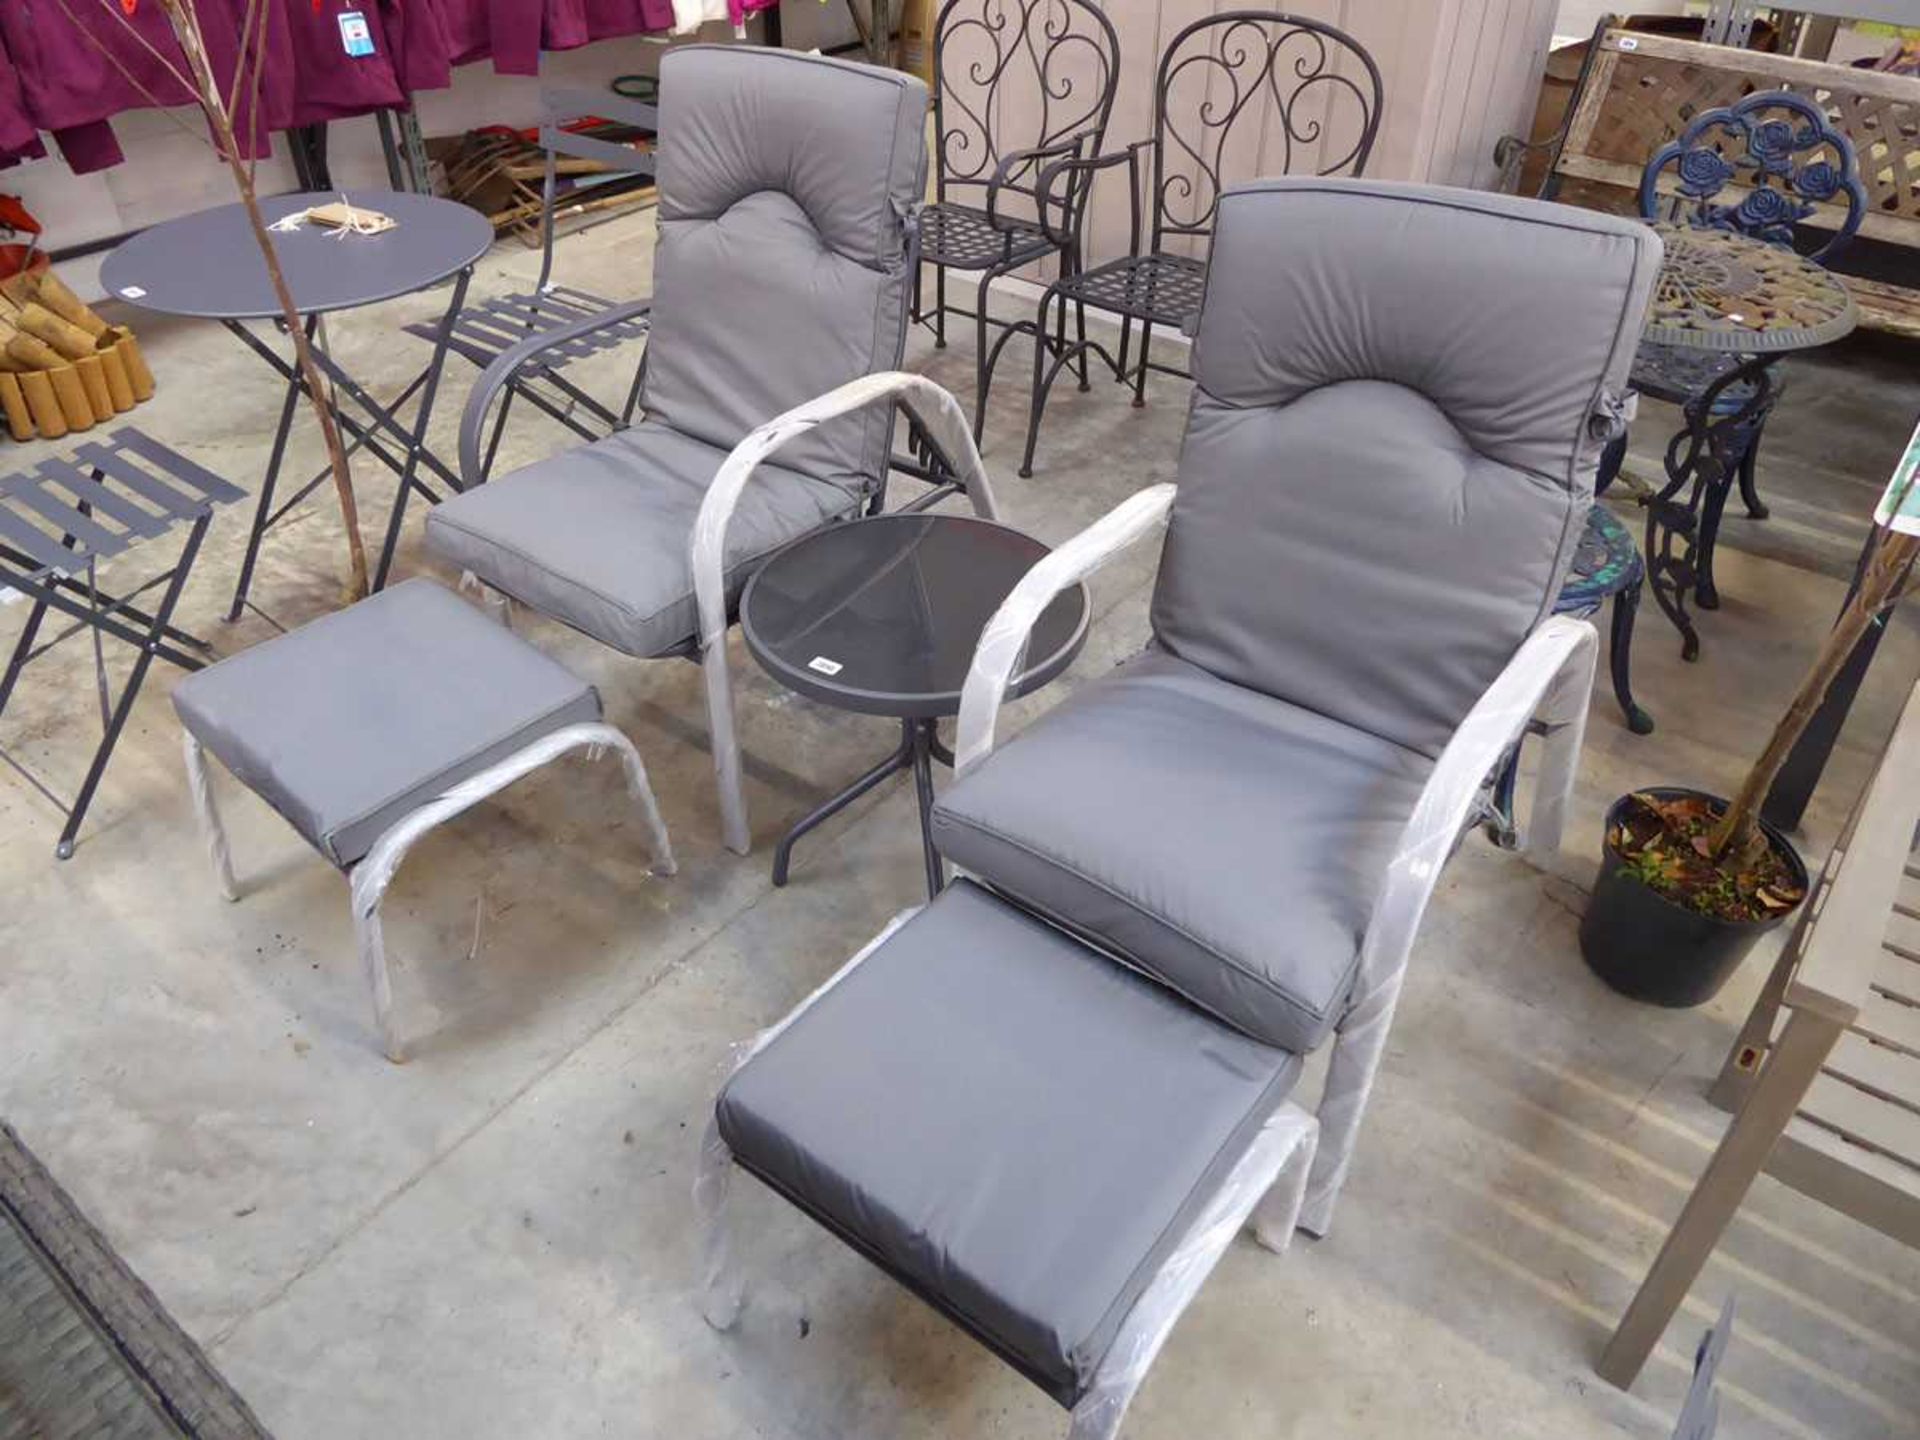 Grey aluminium framed 3 piece garden seating set comprising 2 armchairs and footstools (each with